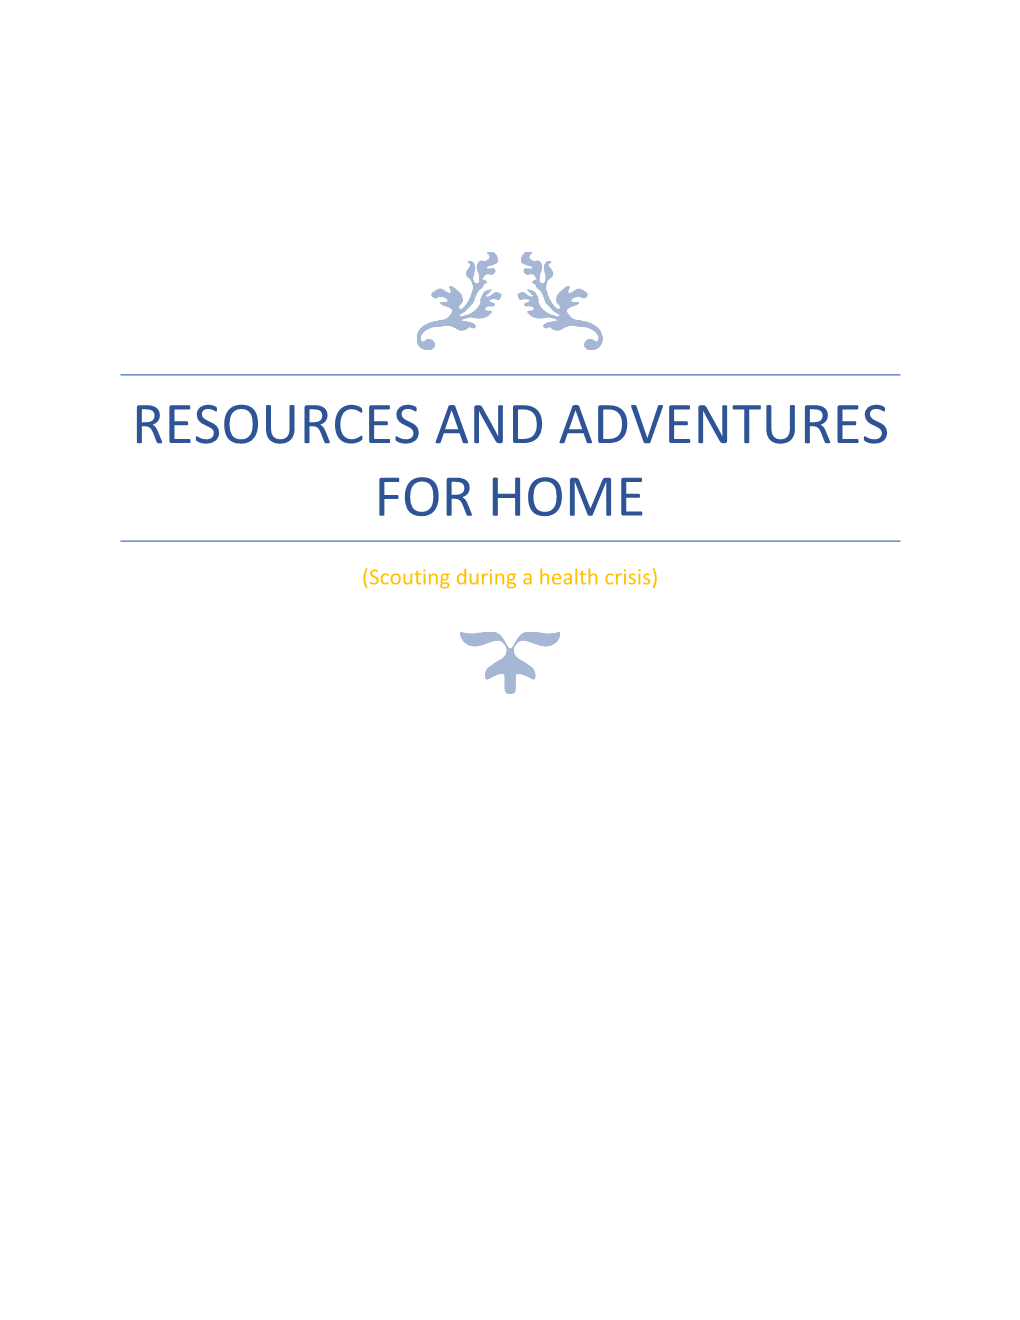 Resources and Adventures for Home